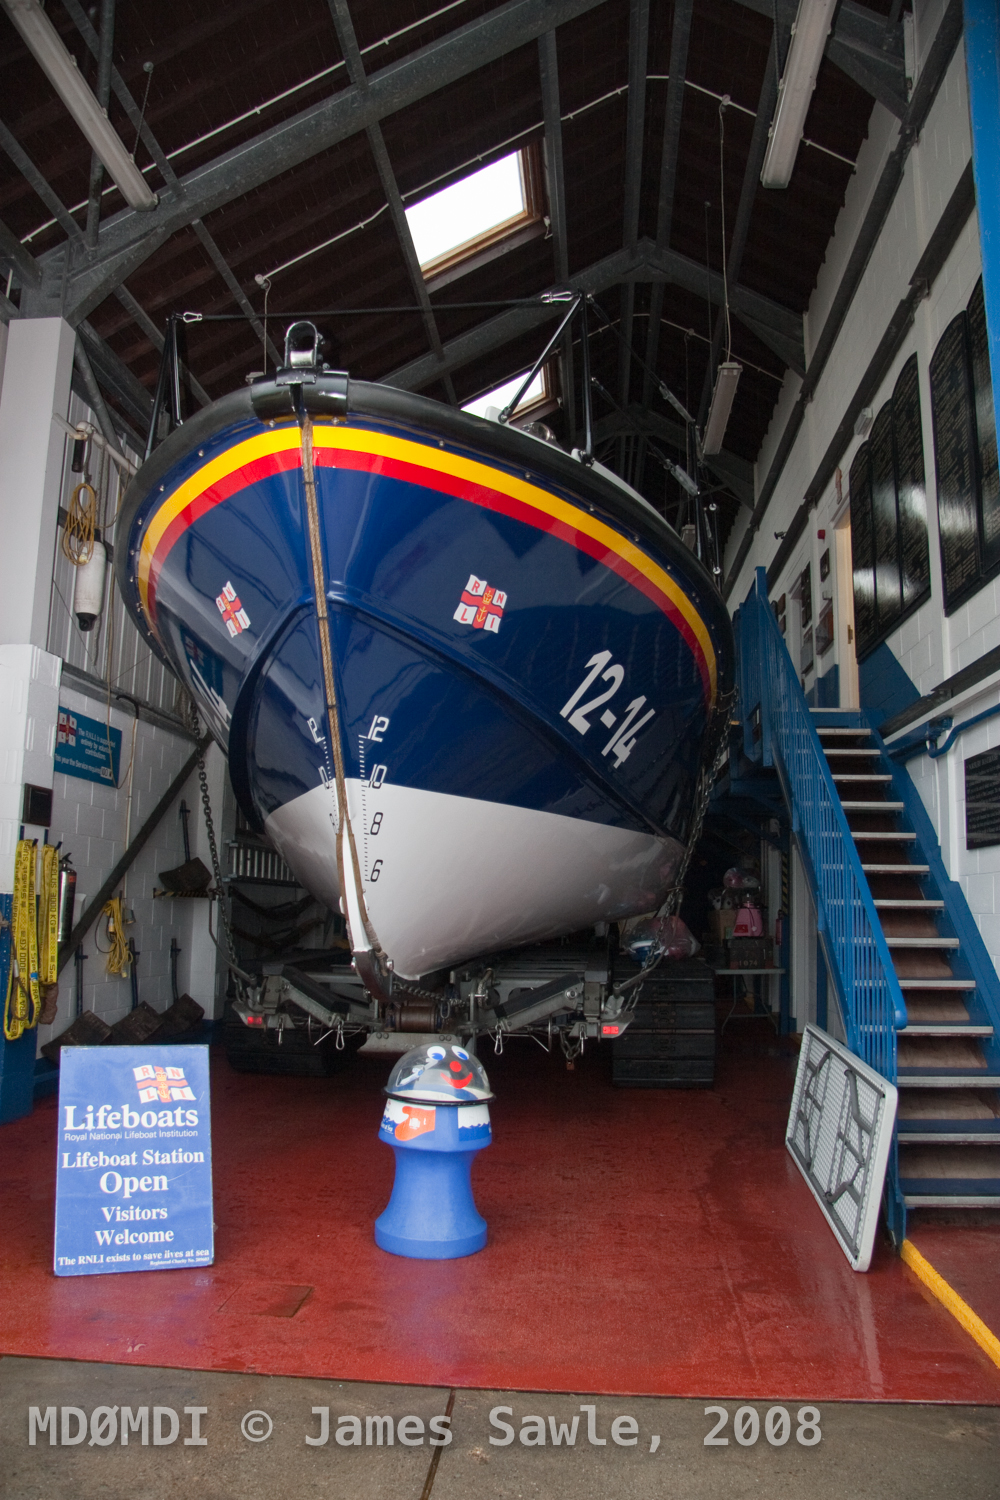 The Ramsey Lifeboat all safe and snug in it’s house…